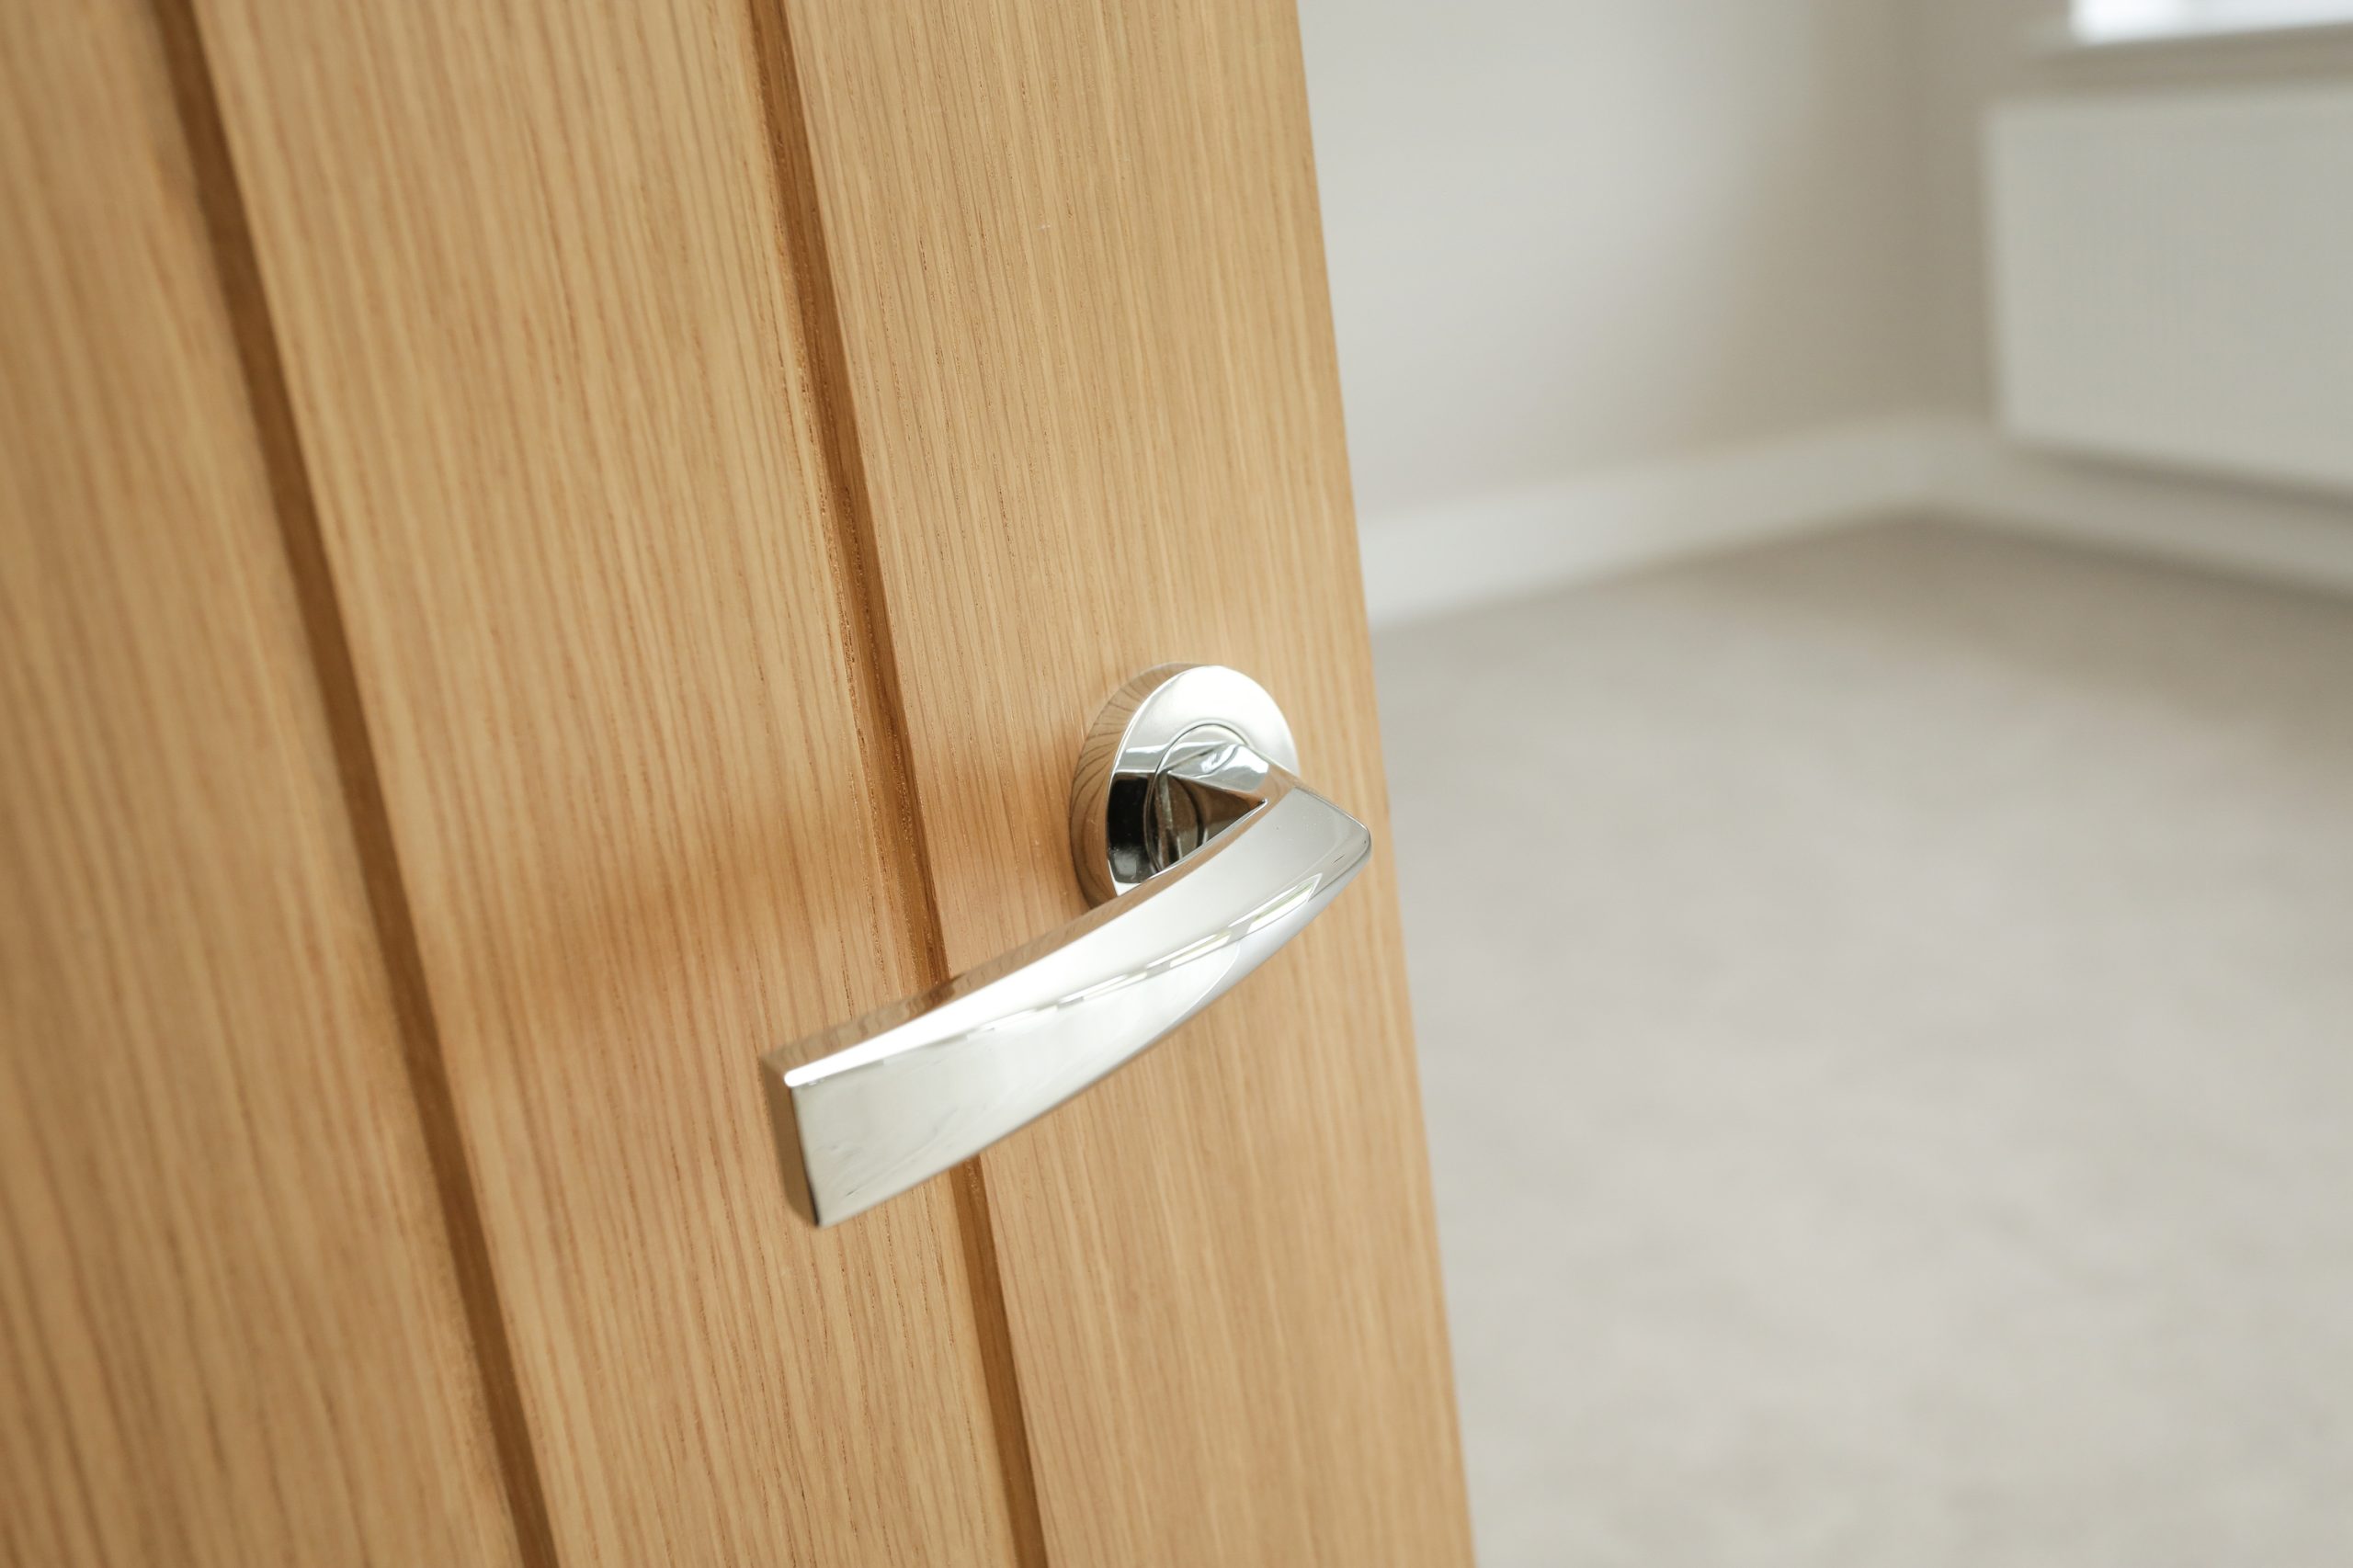 Oak door with chrome fitted handle at our Woodside court development.